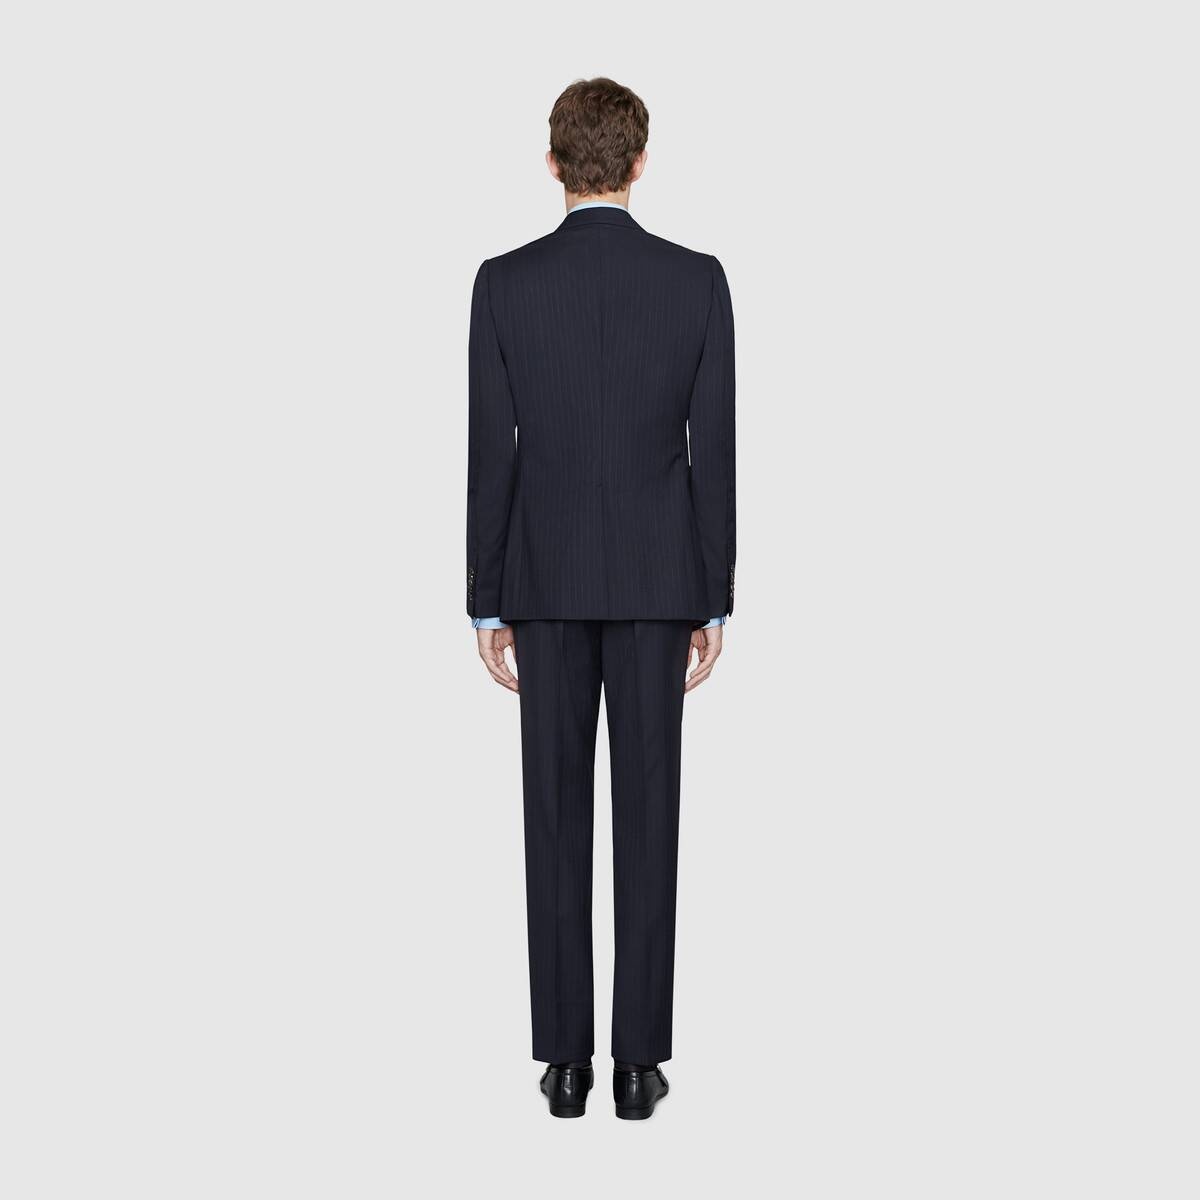 Fitted Gucci pinstripe suit - 4